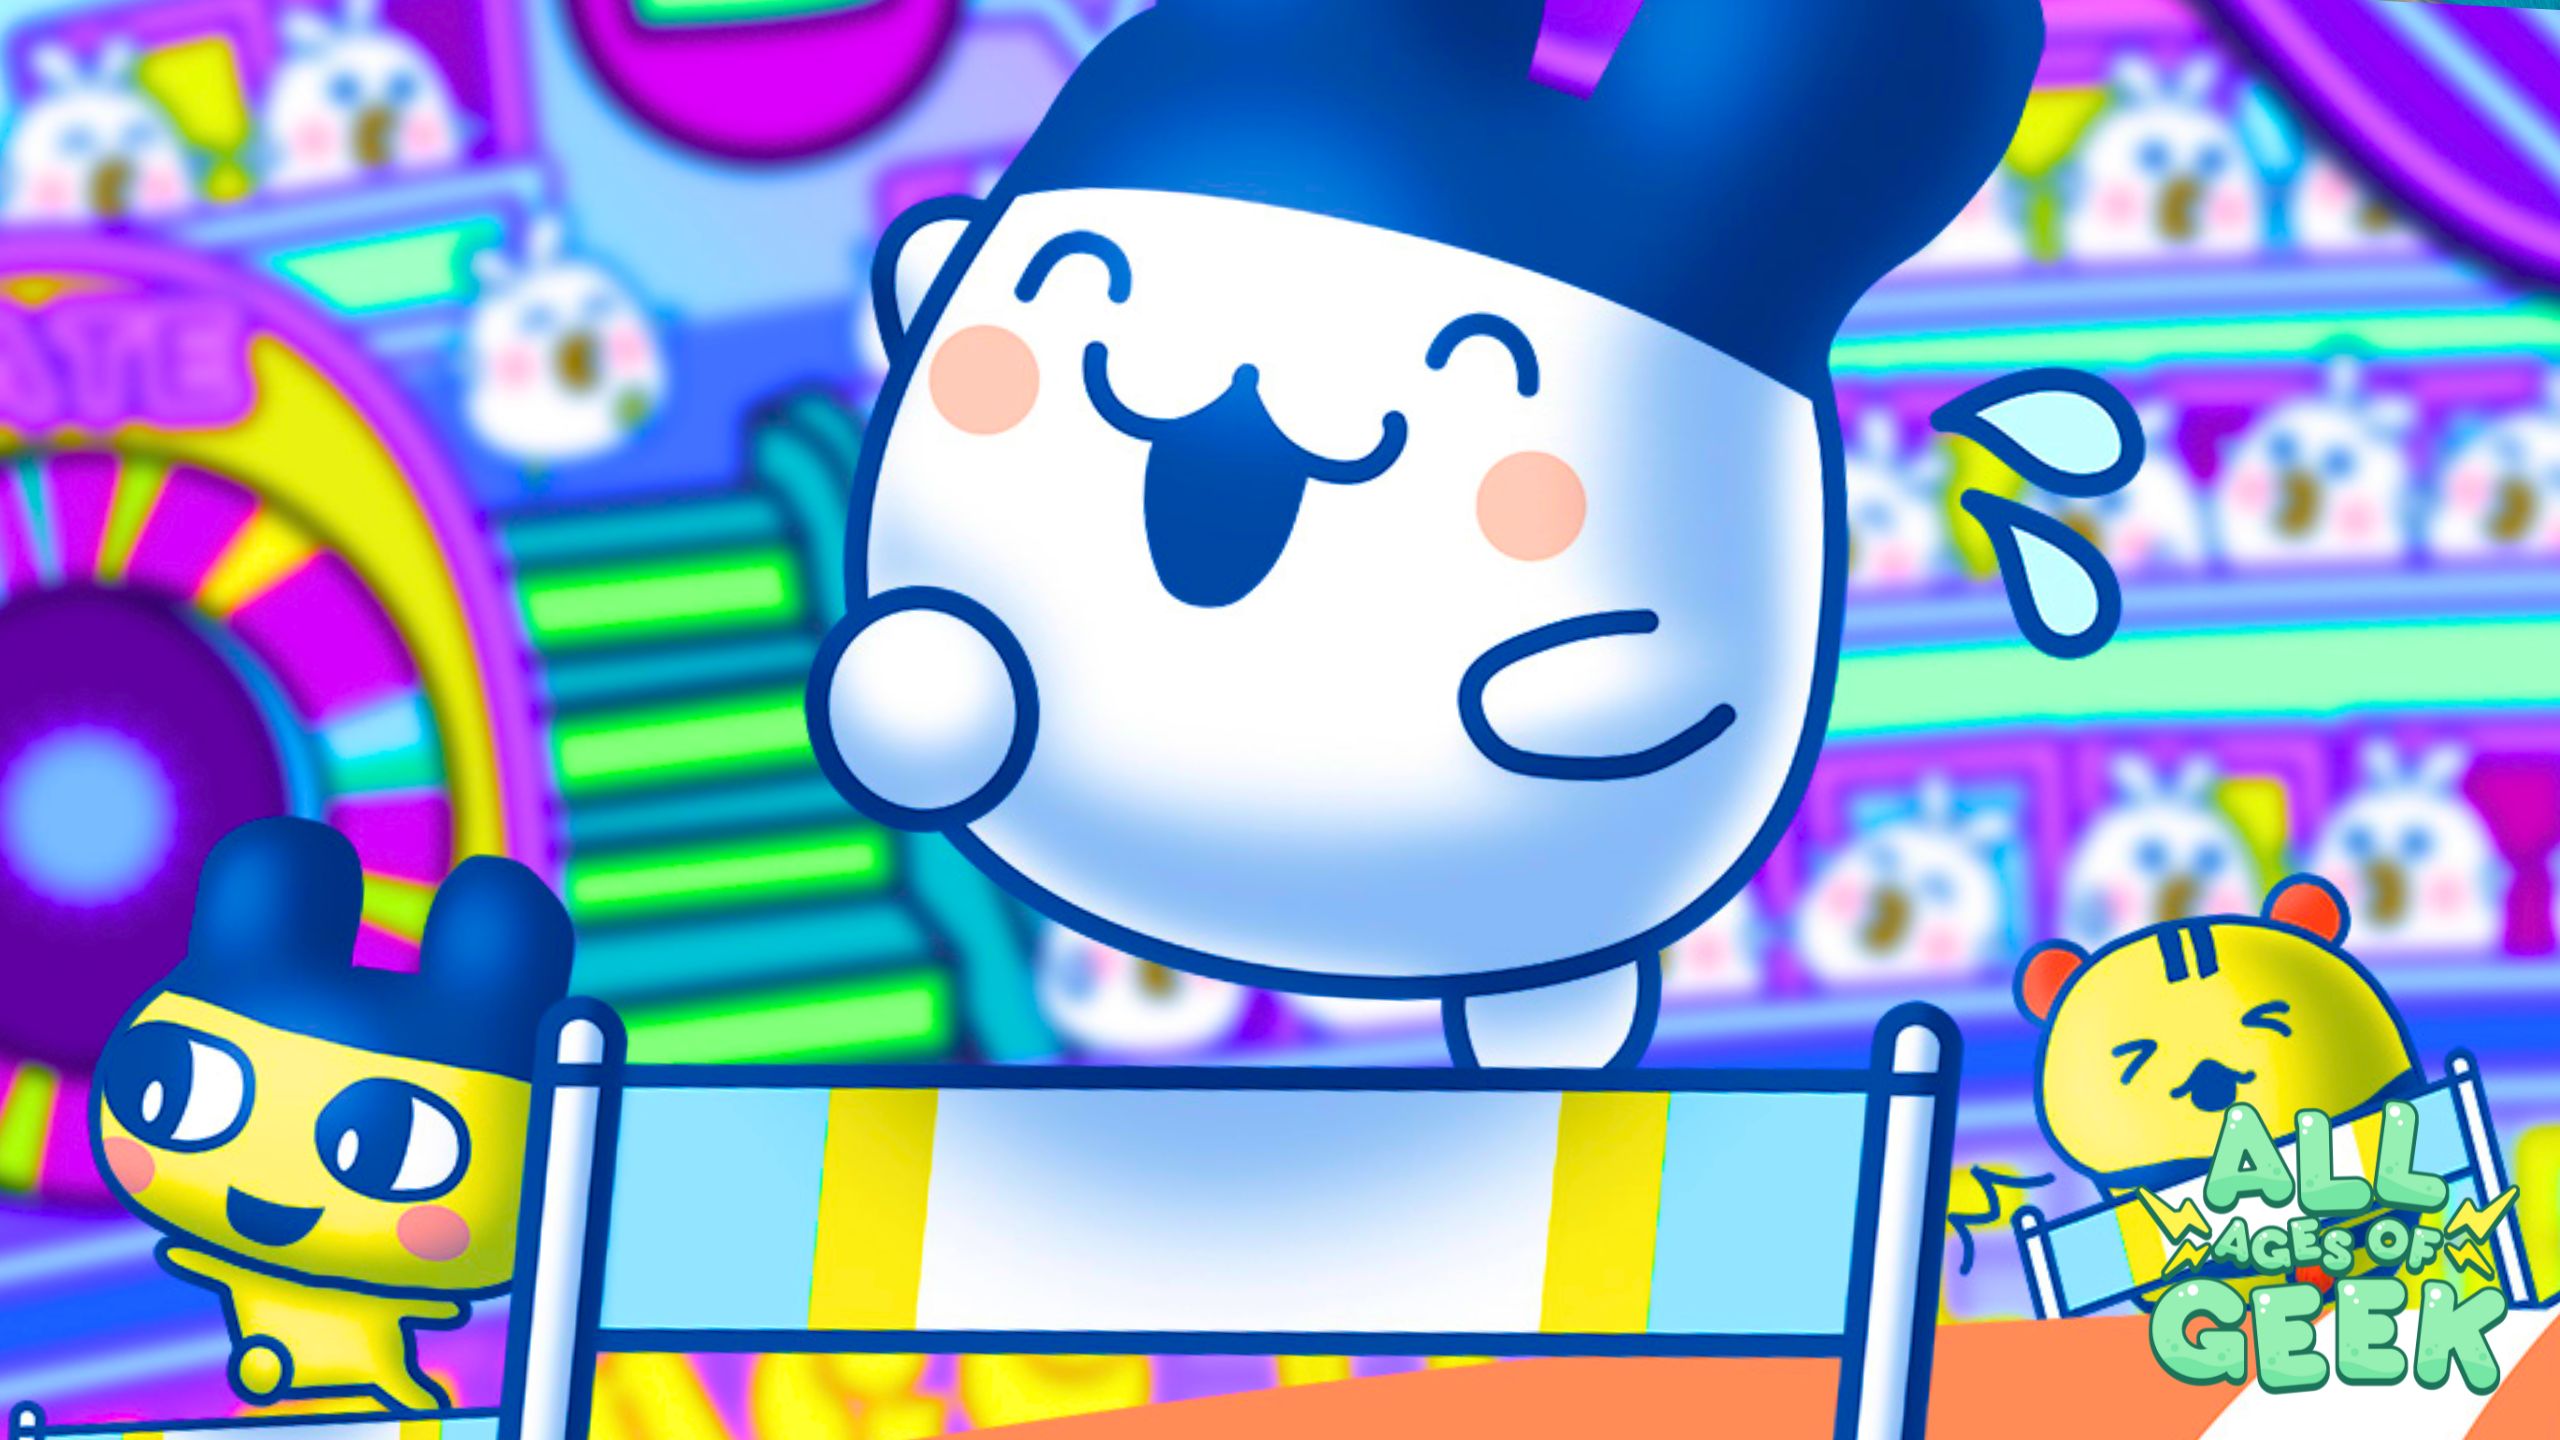 Colorful scene at Tama Arena featuring three cheerful Tamagotchis. The center character is jumping a hurdle, looking excited with a big smile. On the left, another Tamagotchi is preparing to jump over a hurdle, while on the right, a third Tamagotchi is also jumping. The background is vibrant with neon colors and cheering crowds. The 'All Ages of Geek' logo is visible in the bottom right corner.